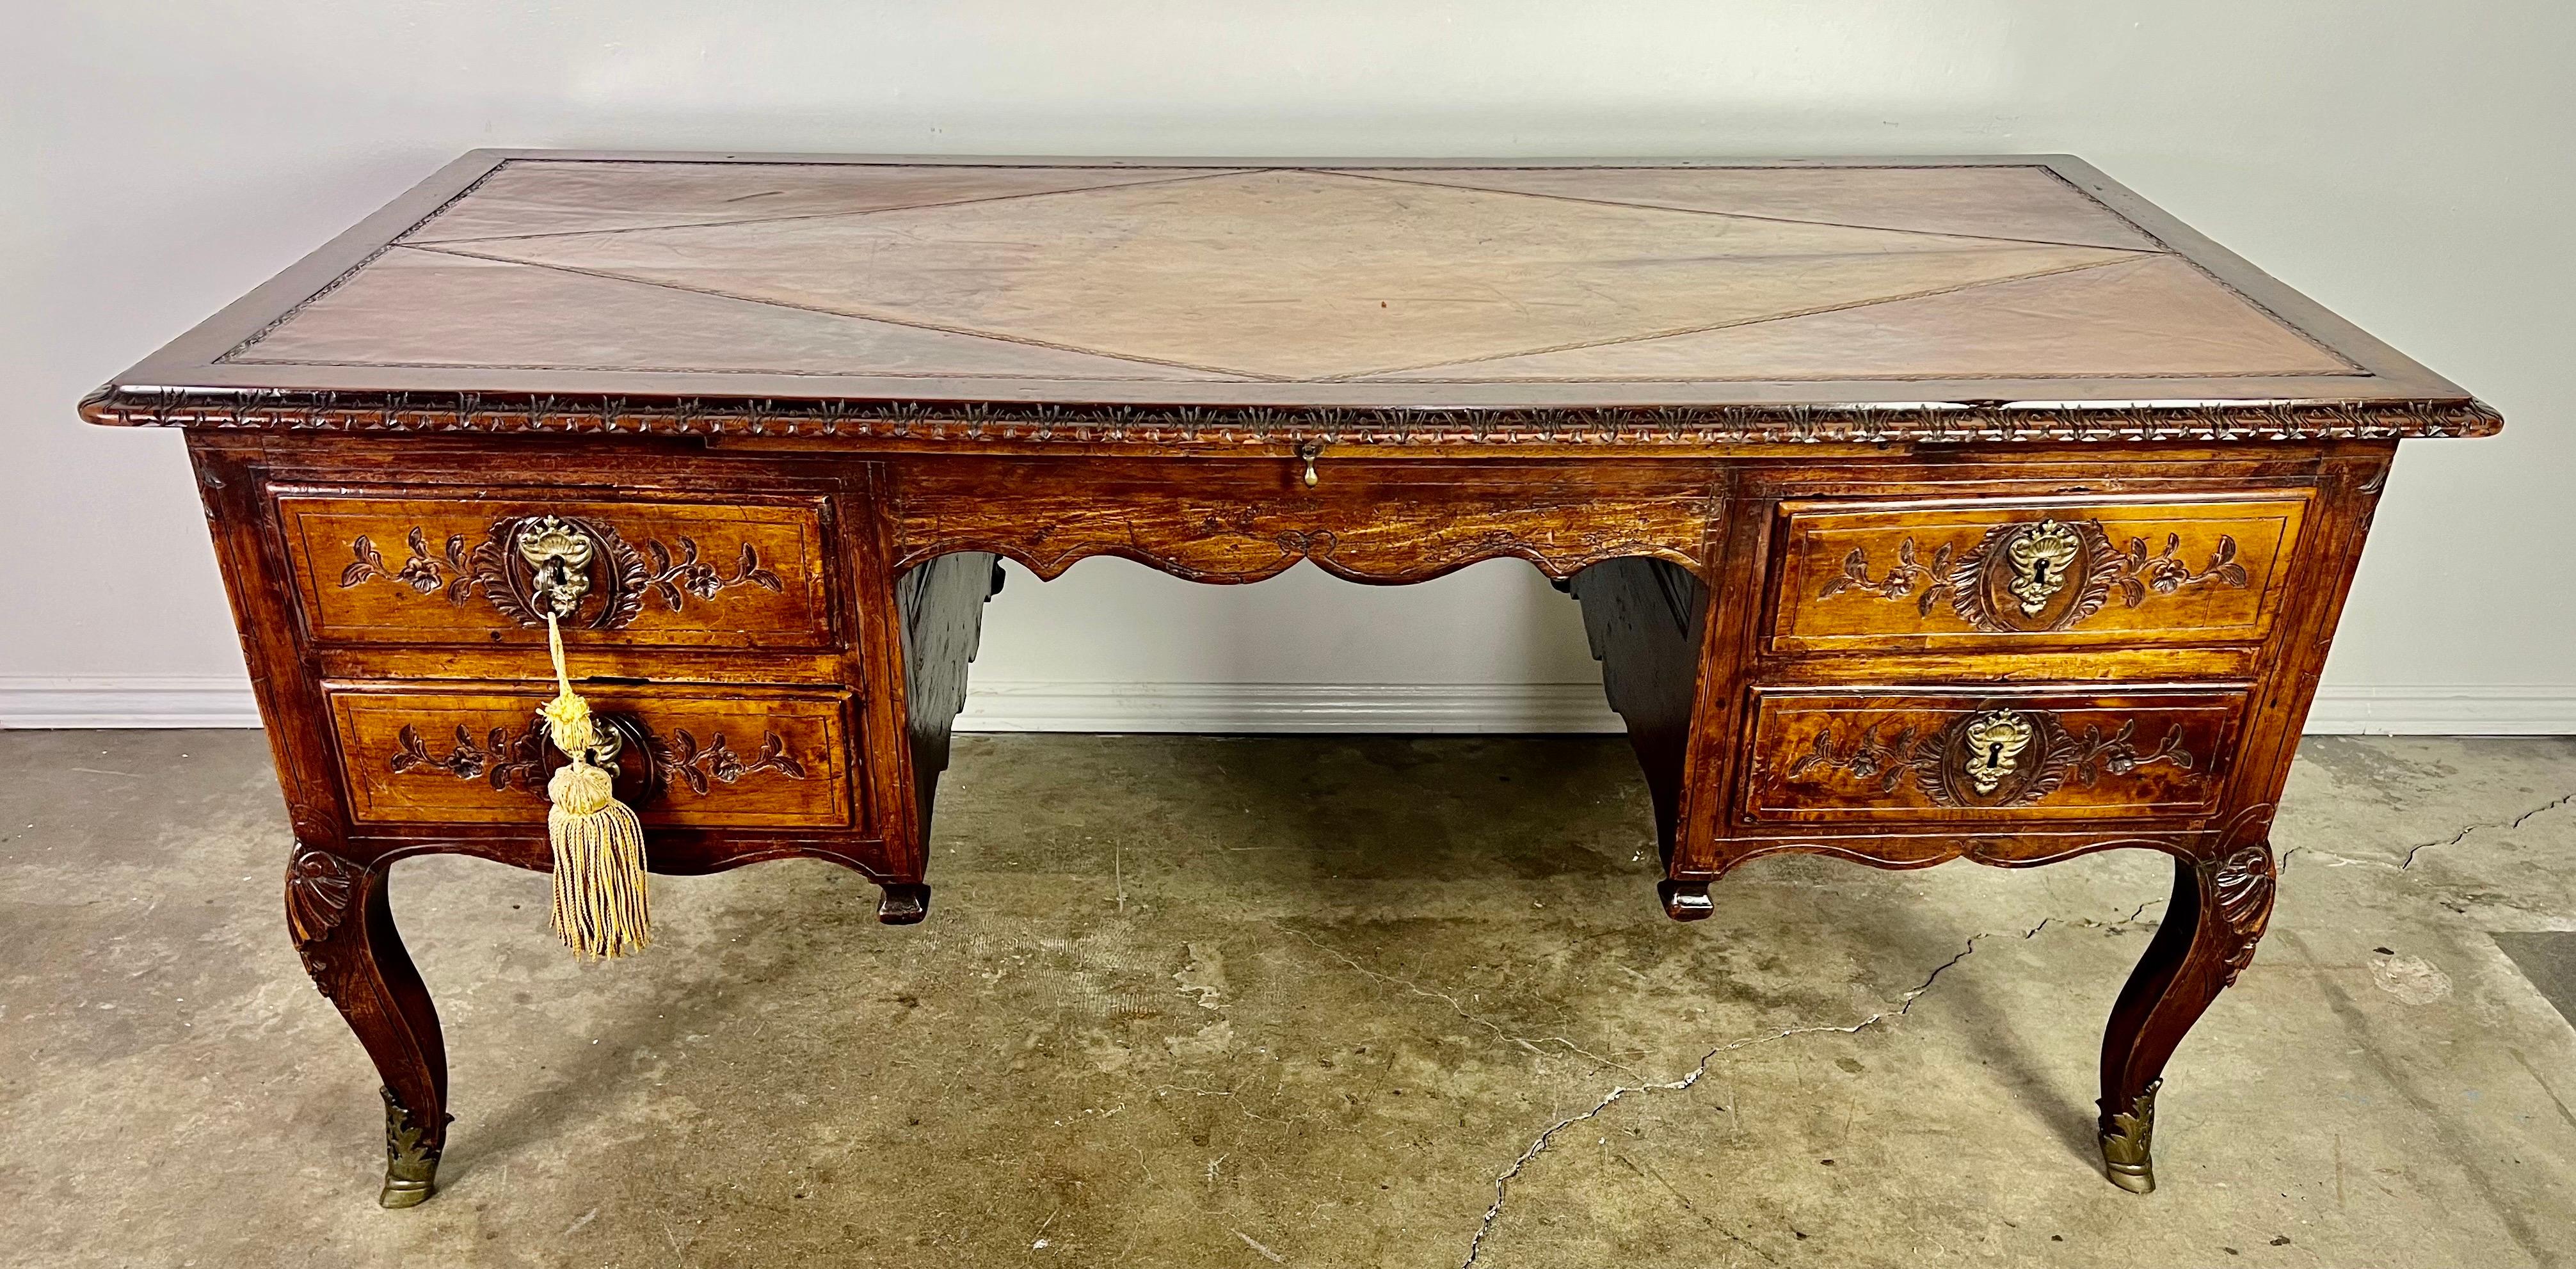 Late 18th century hand carved French provincial desk. The desk is carved in walnut and is extremely heavy and sturdy after all the year's of use. The finish has developed a beautiful patina that only comes from years of taking care of the wood by